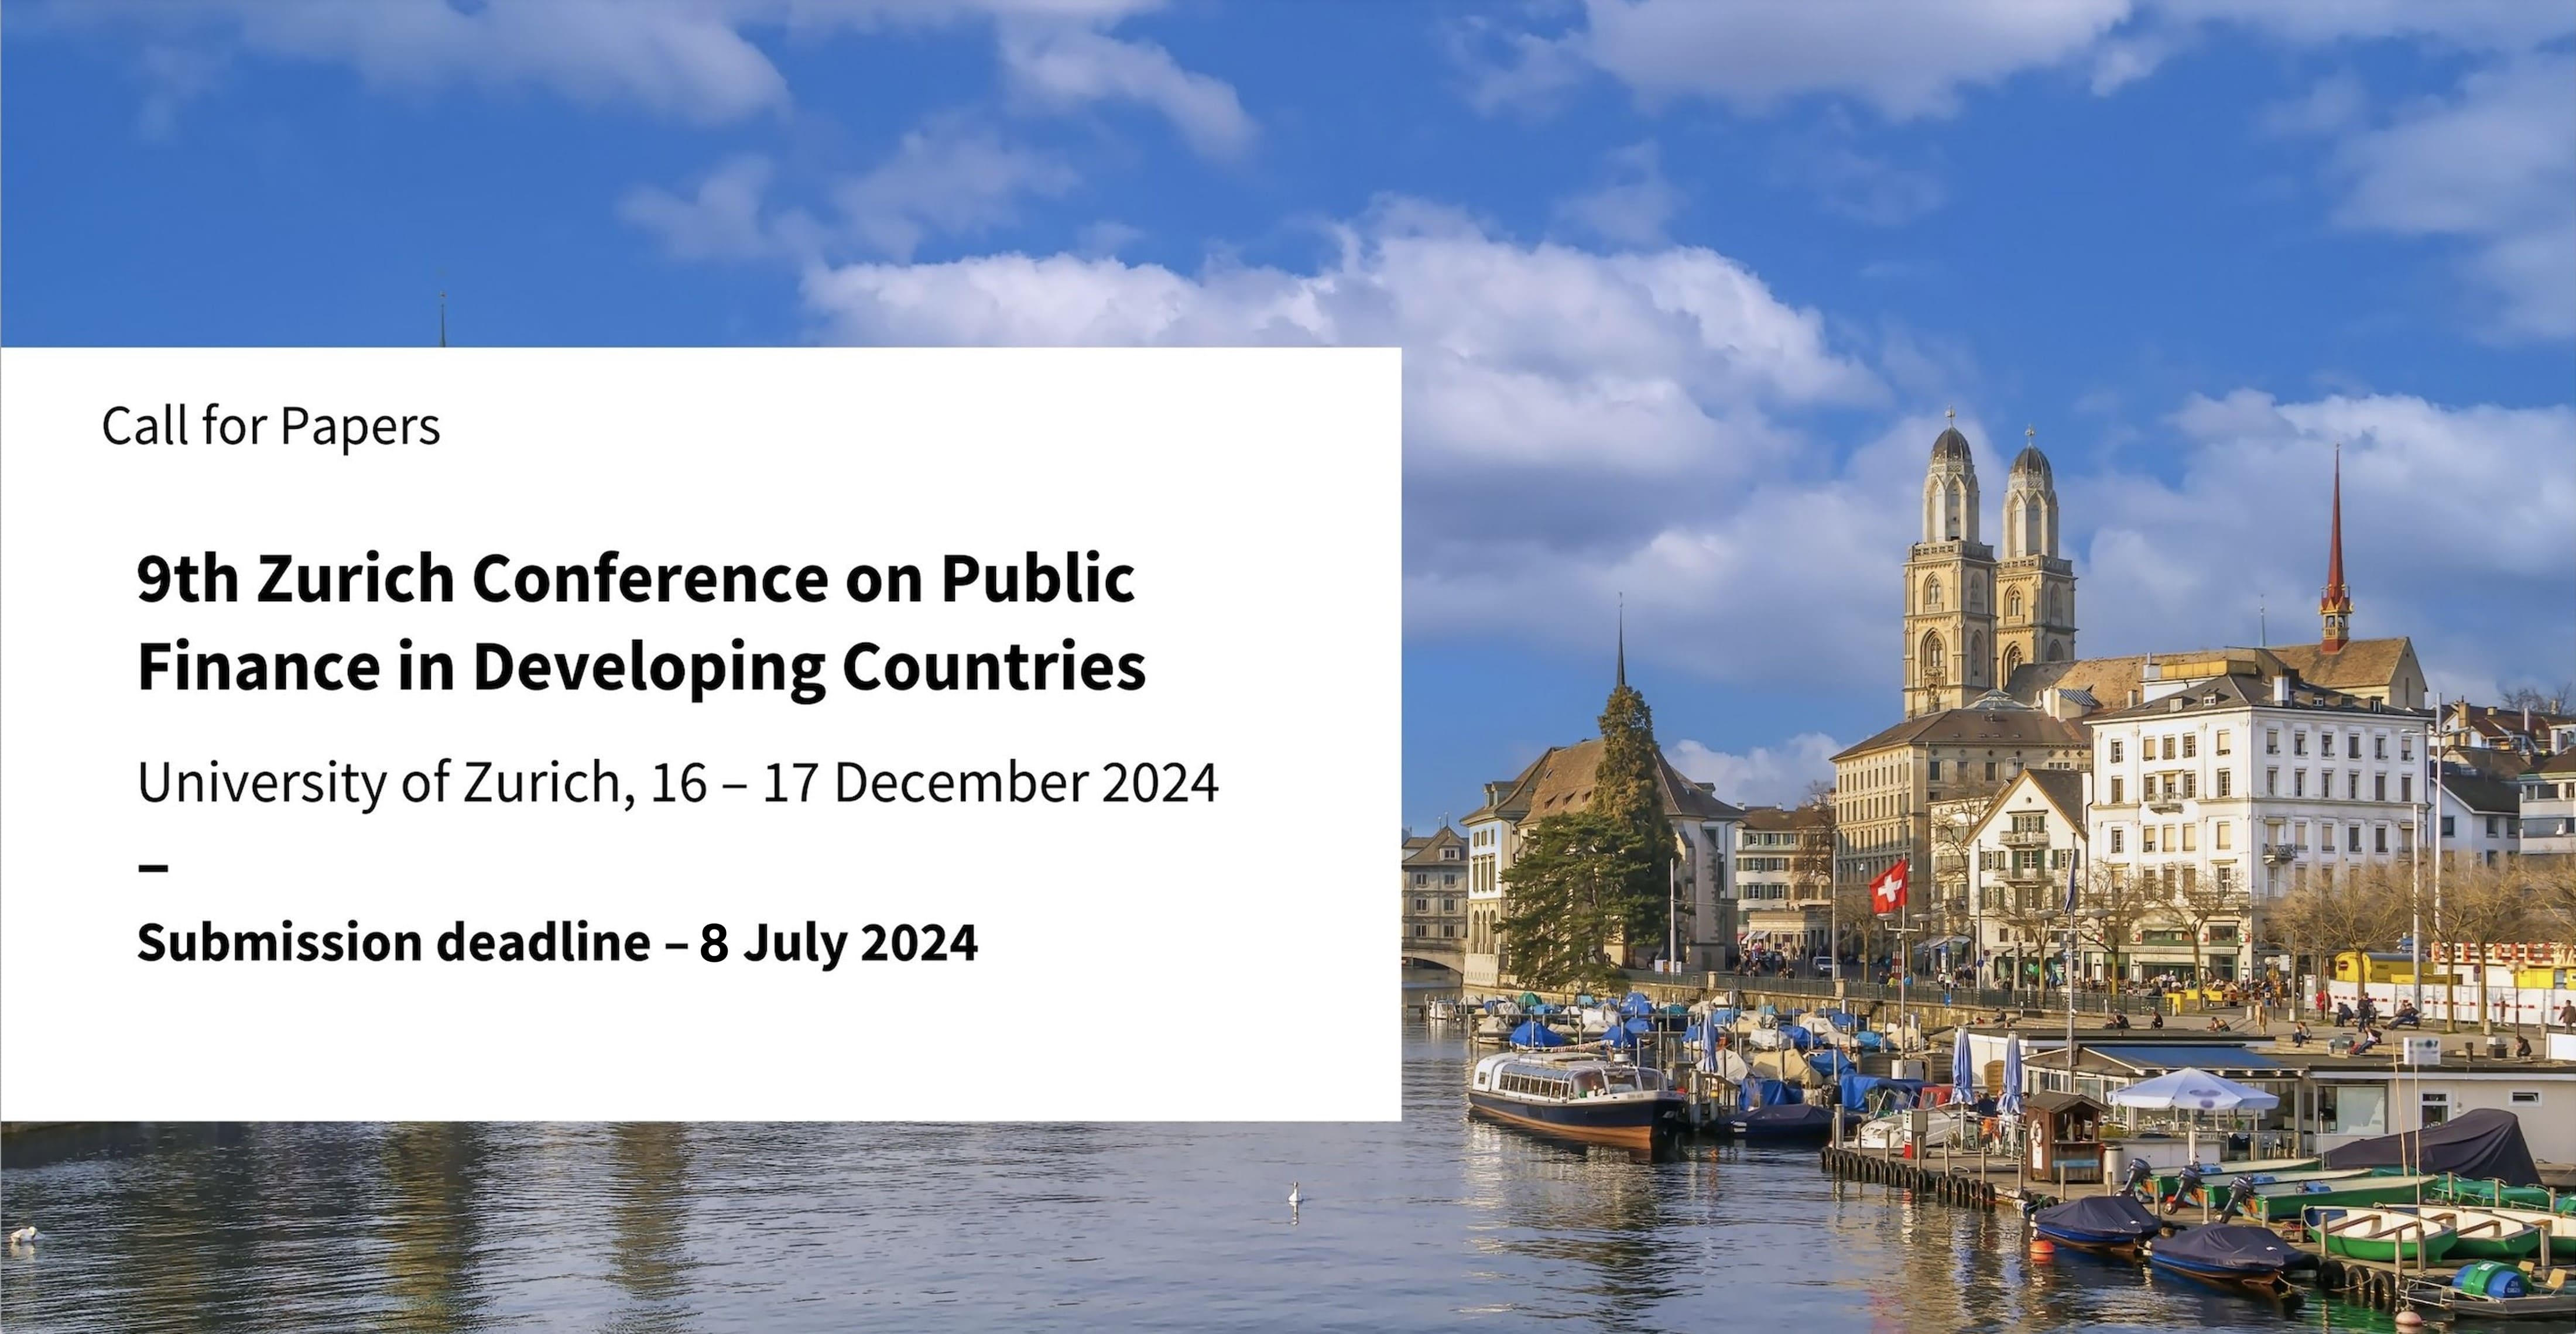 9th Zurich Conference call for papers. Paper deadline is July 8th 2024.